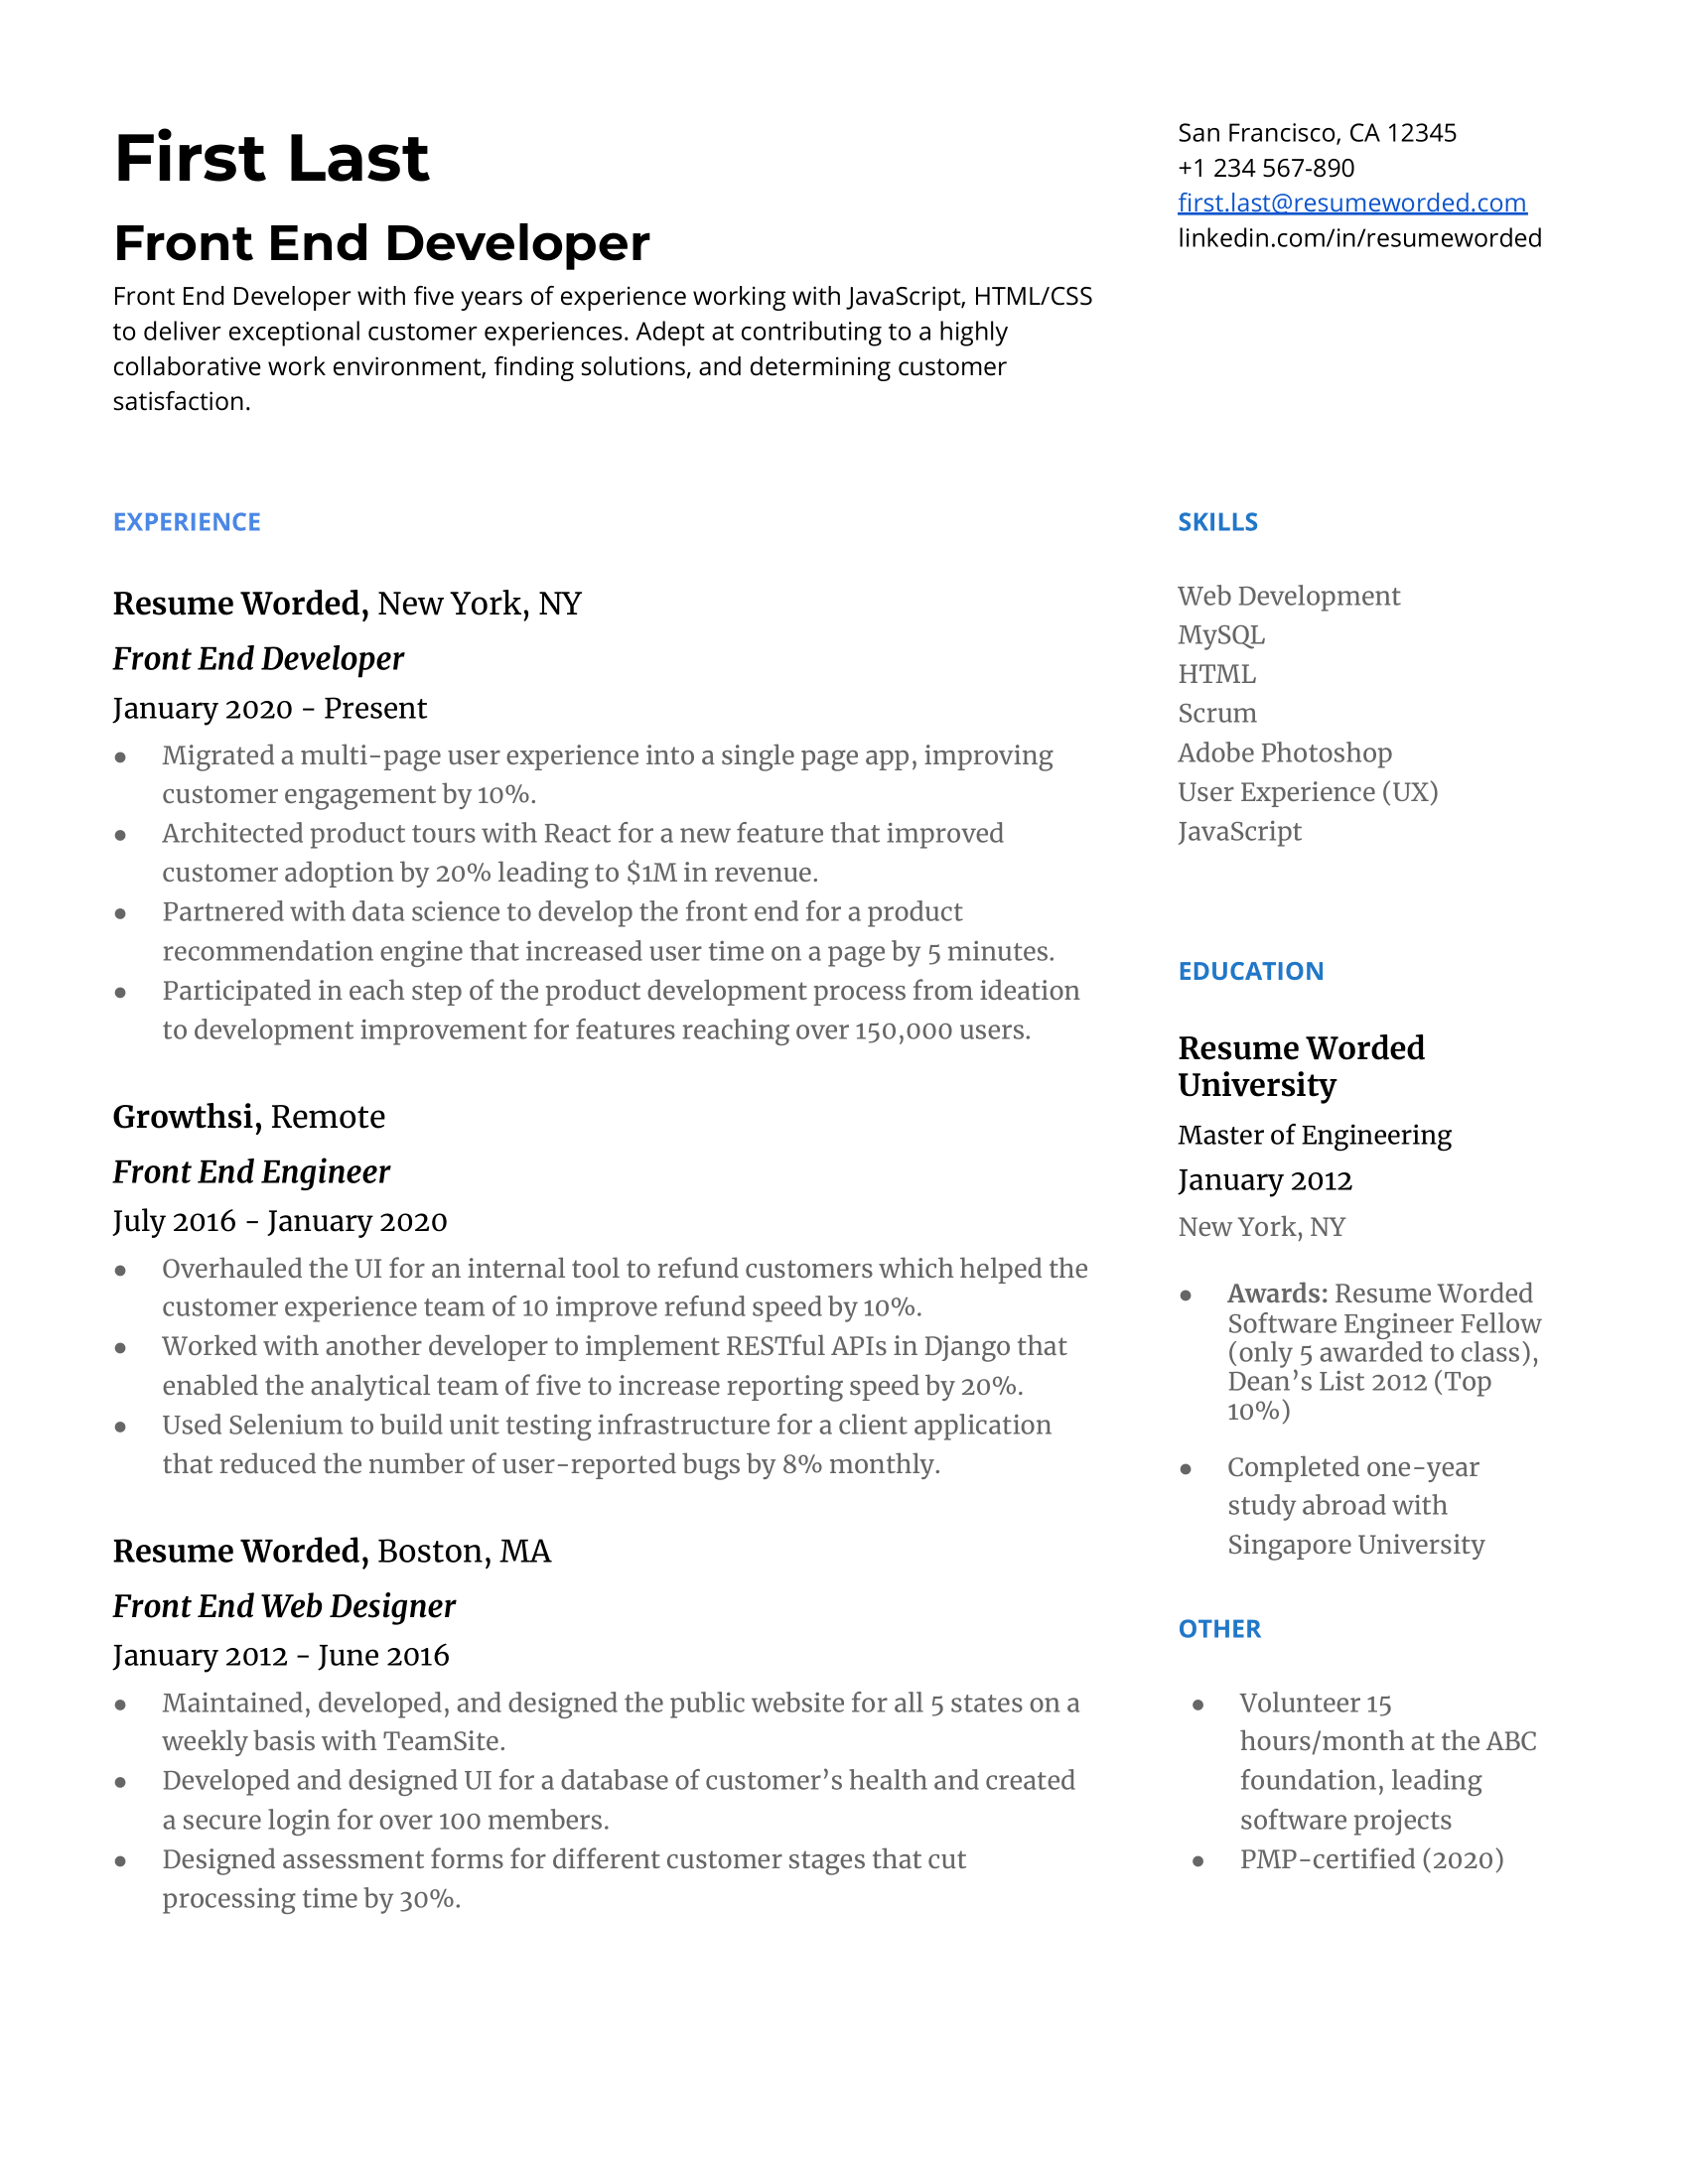 CV sample showcasing a Front End Developer's technical and soft skills.